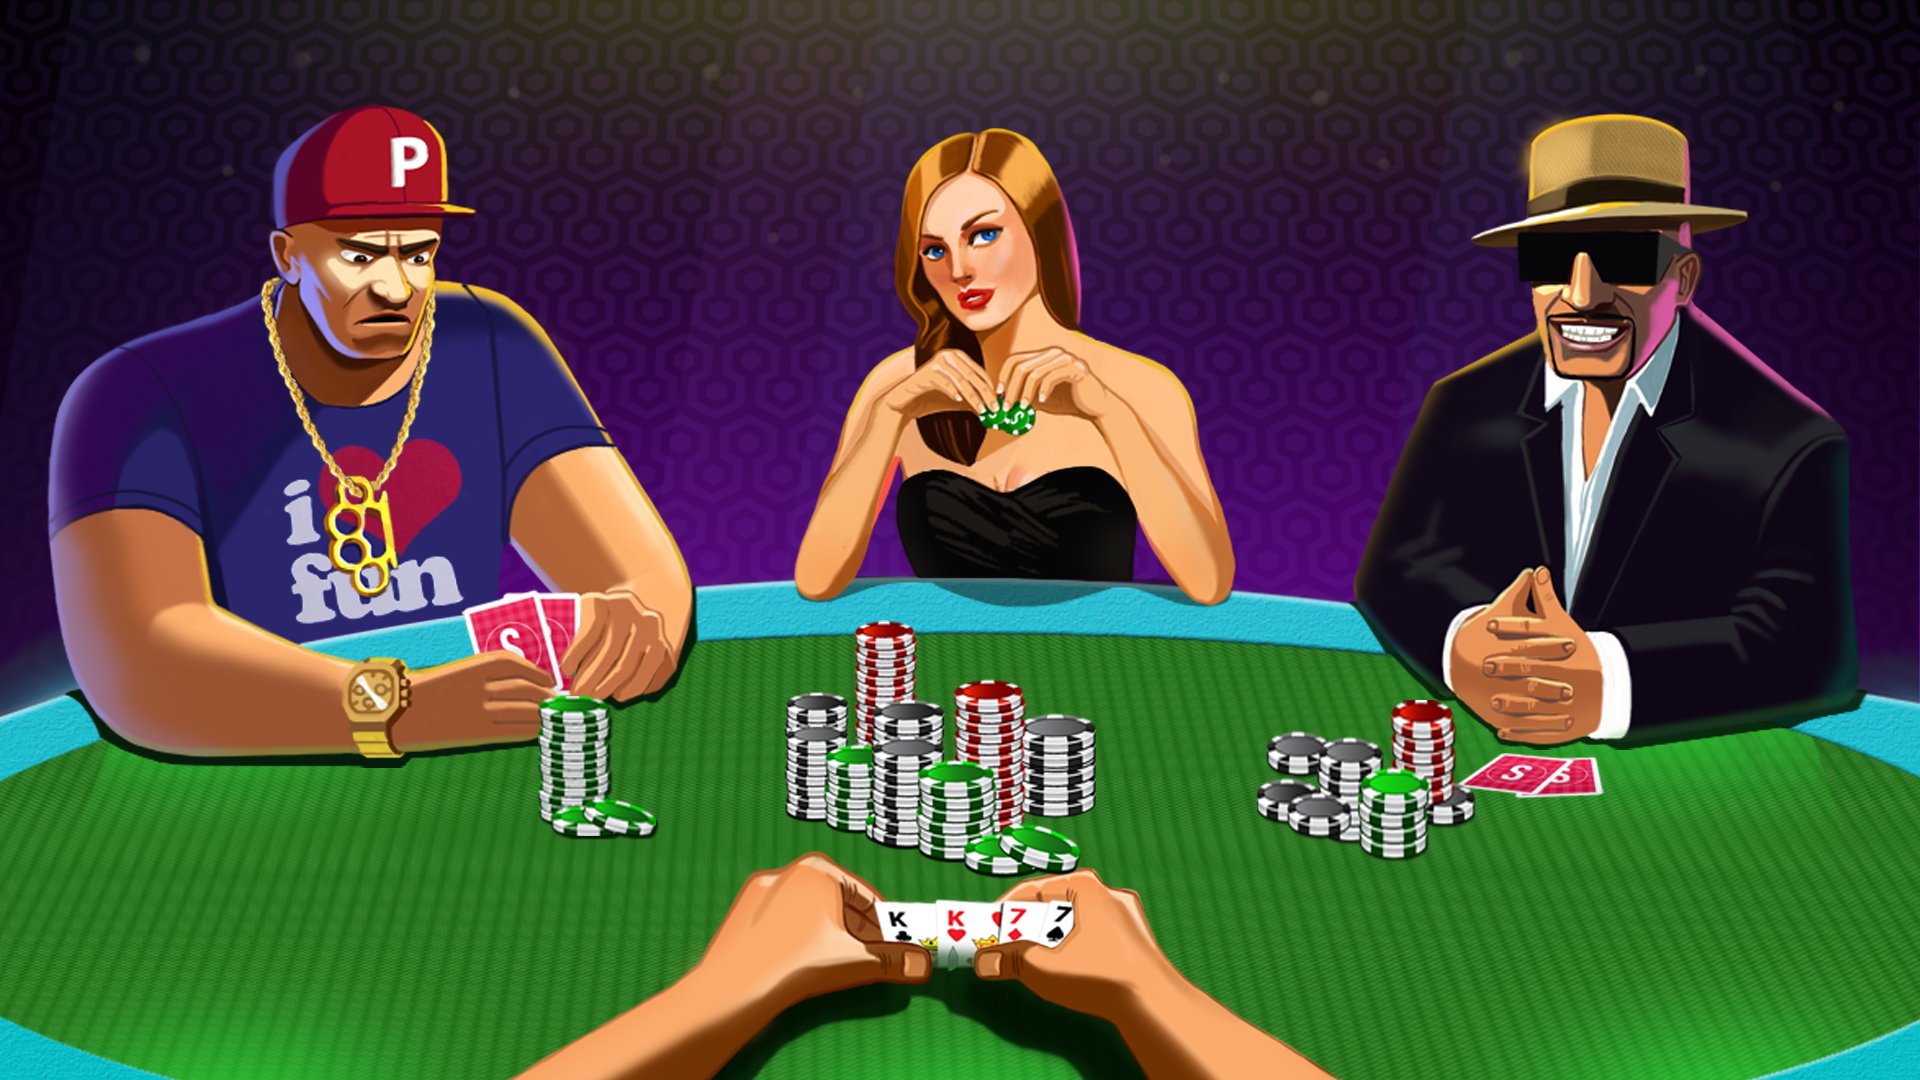 How to play texas hold